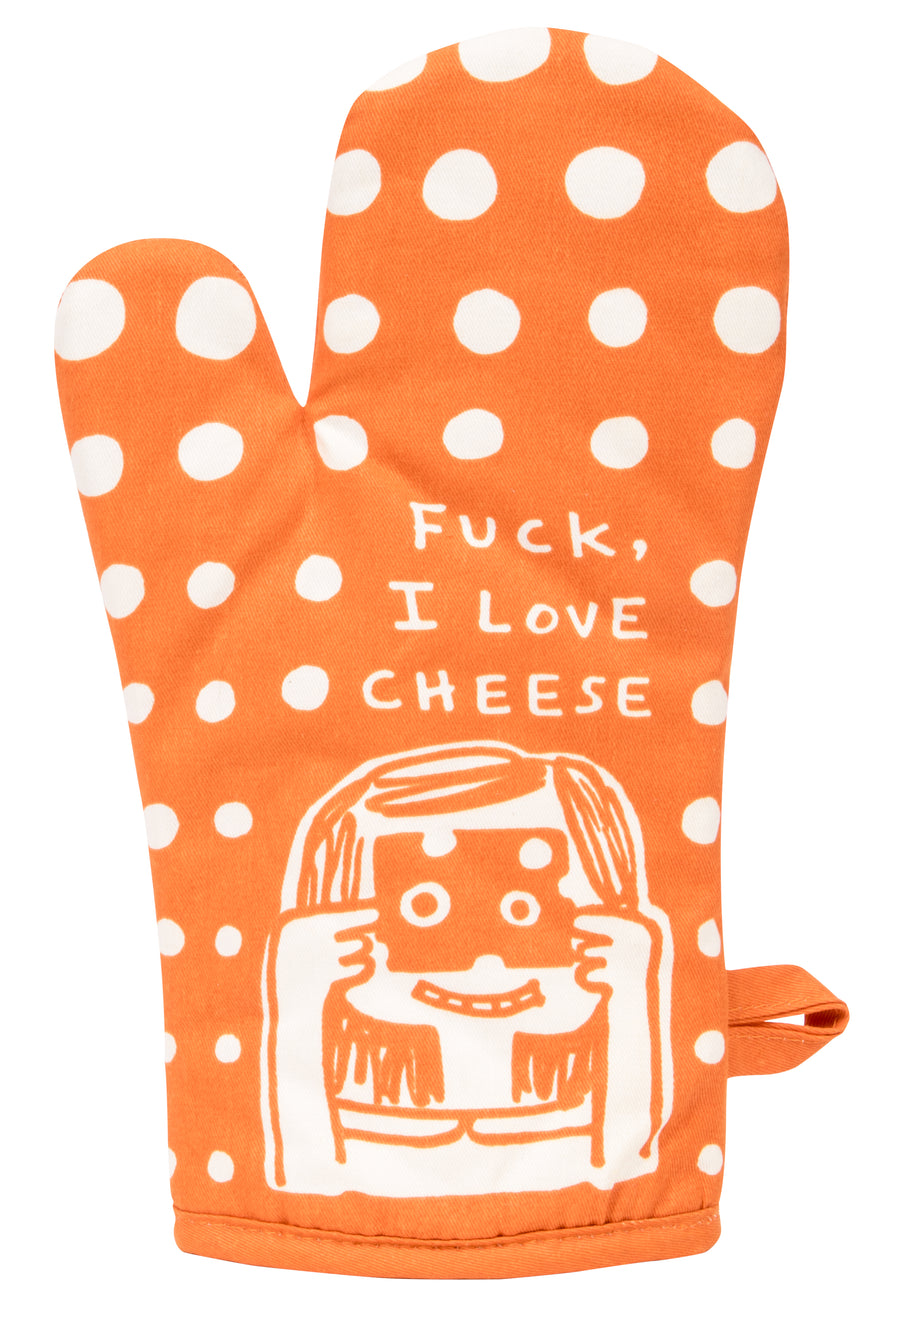 I Love My A**hole Kids Oven Mitt from Blue Q – Urban General Store